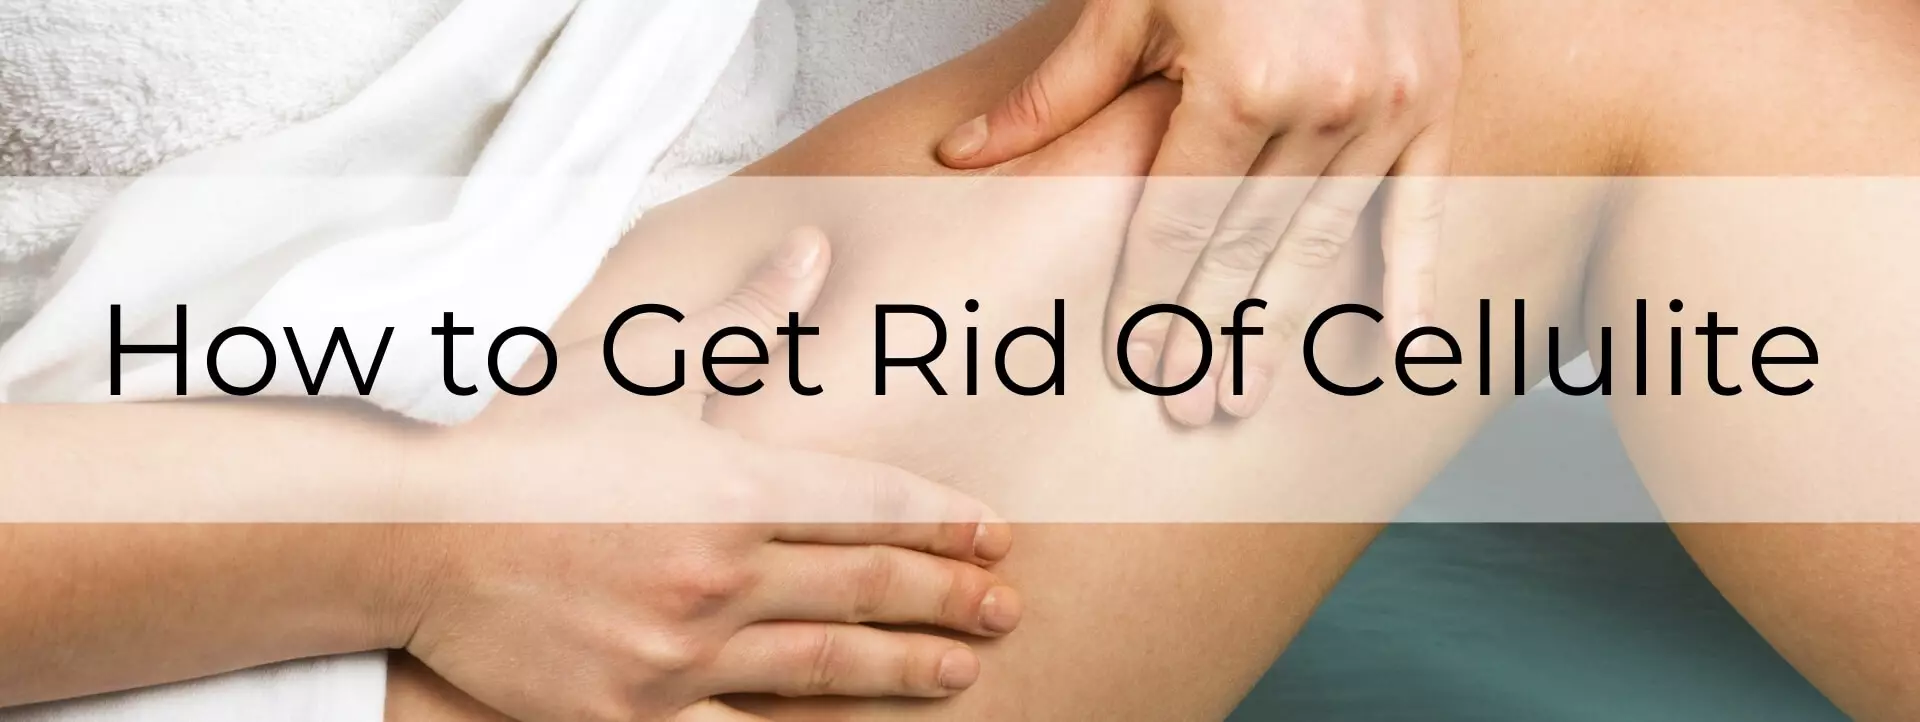 get rid of cellulite main-post-image